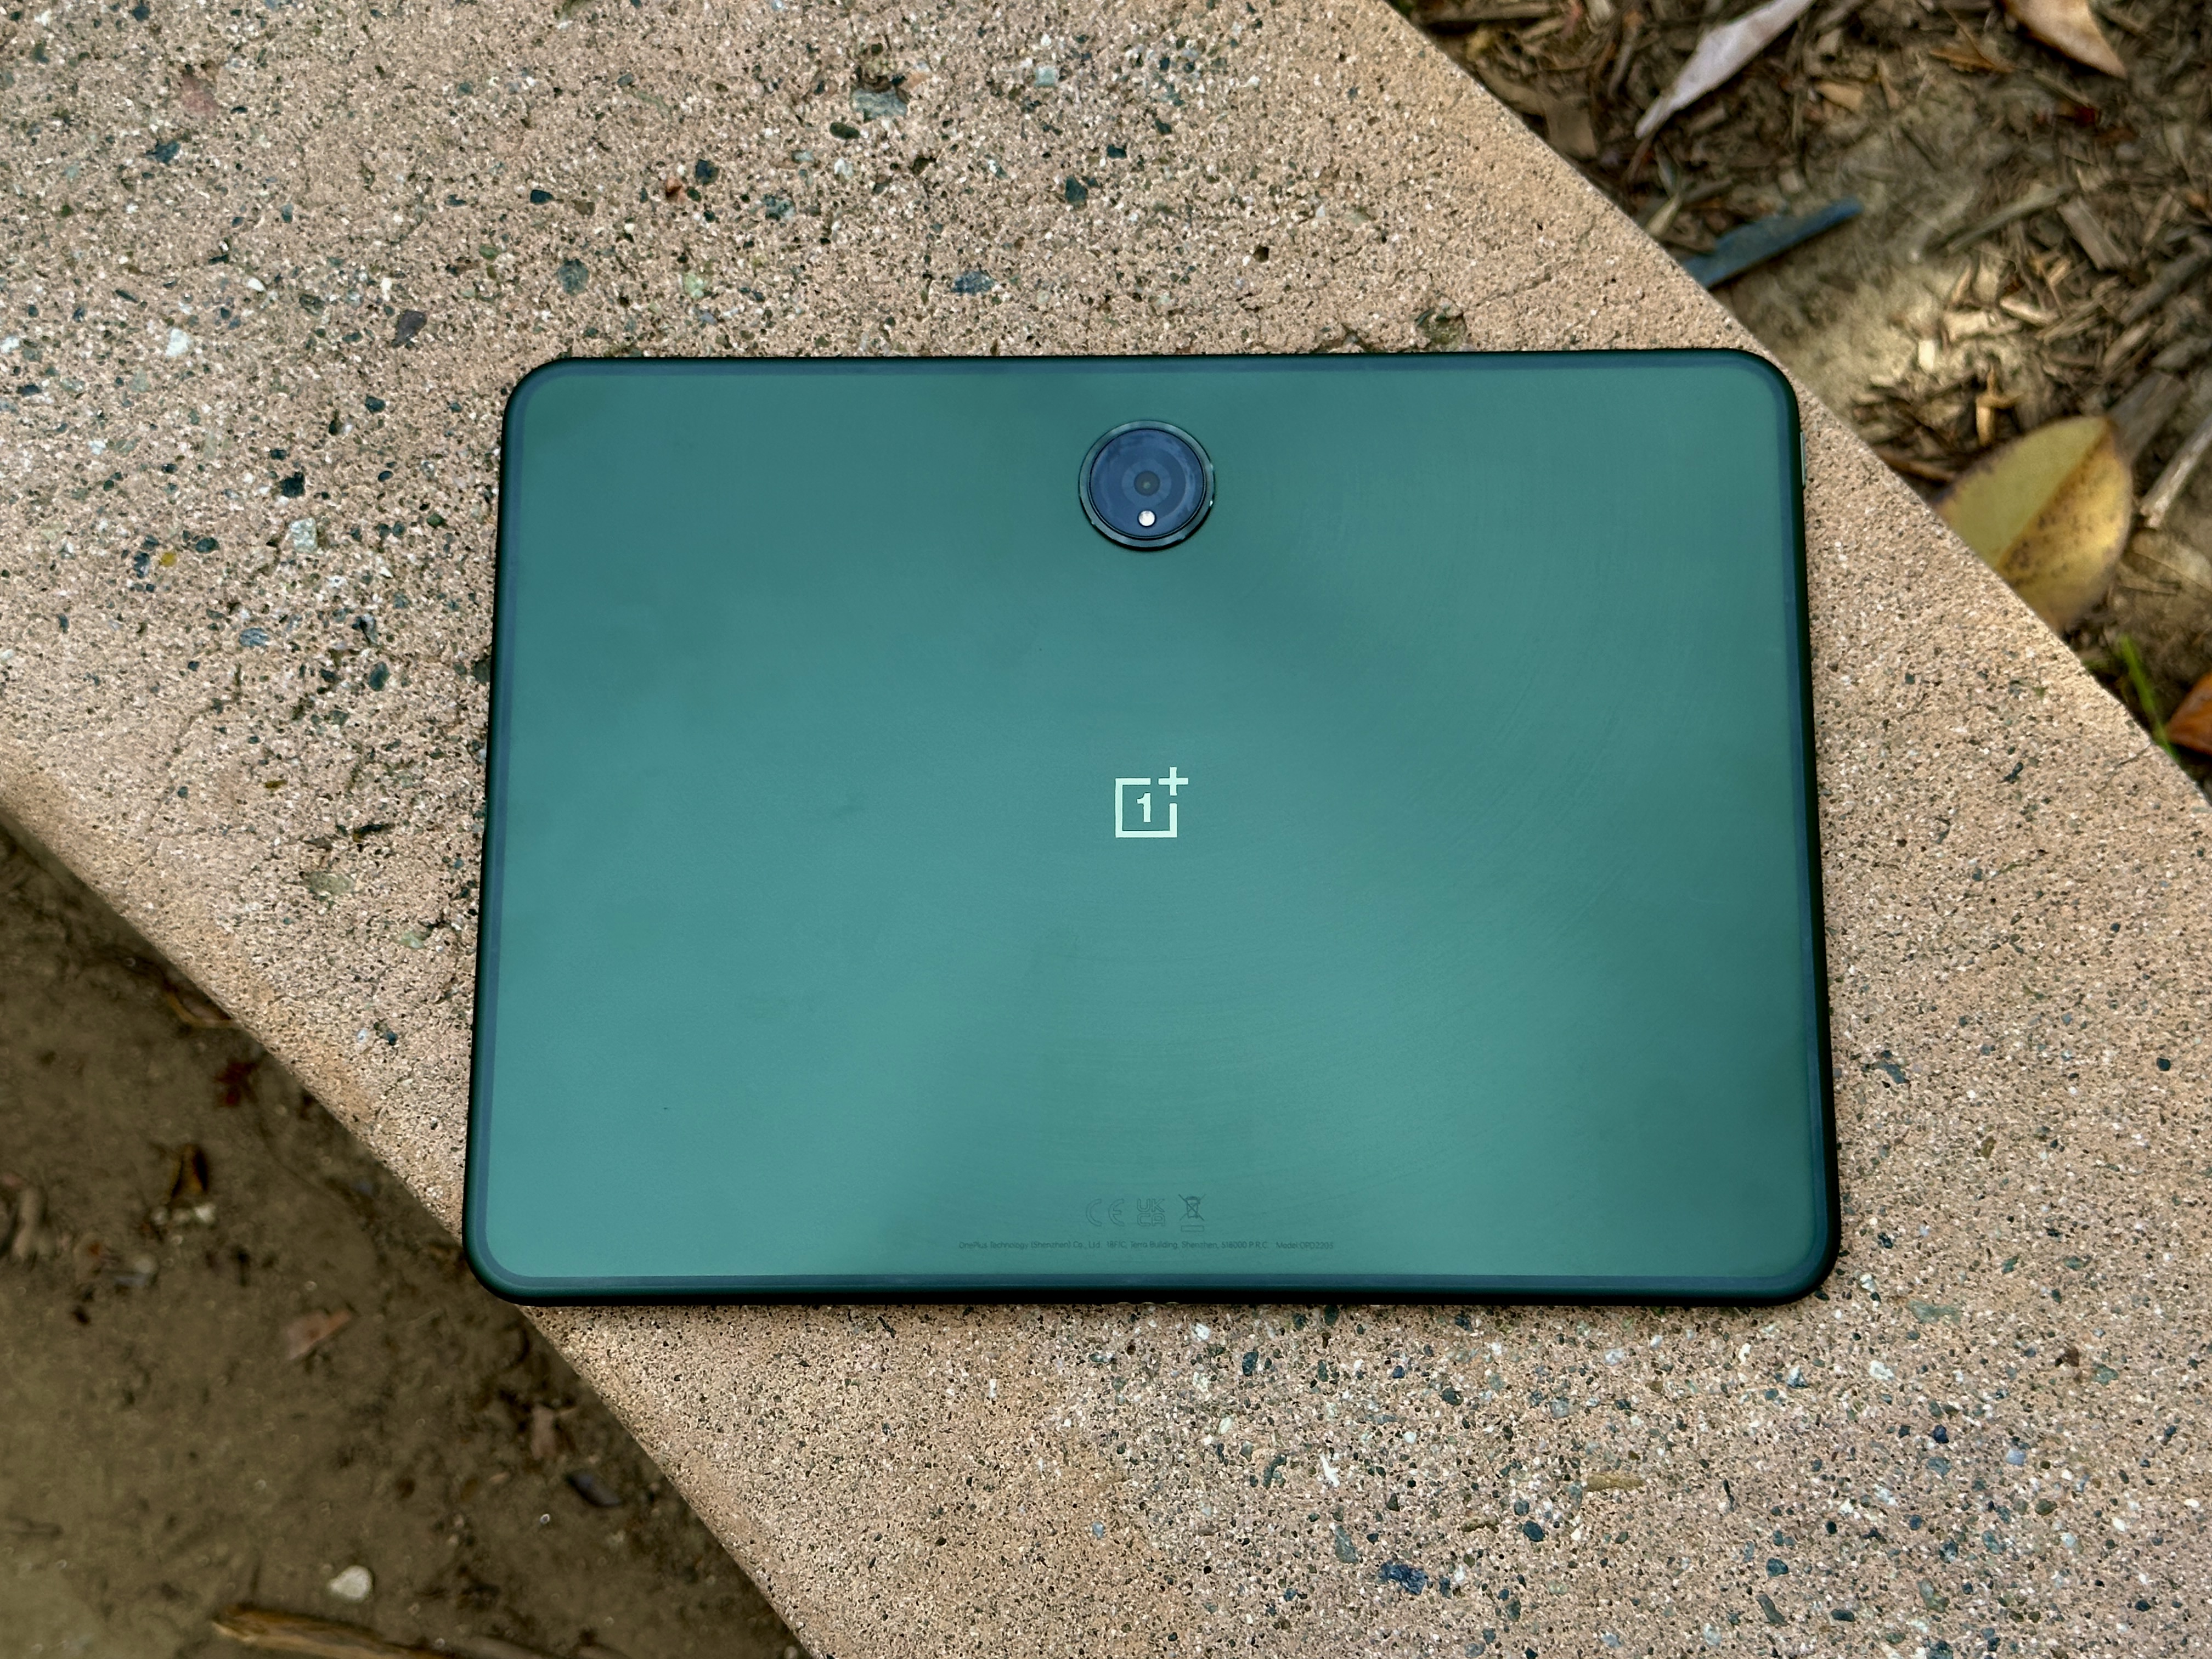 OnePlus Pad Reviews, Pros and Cons